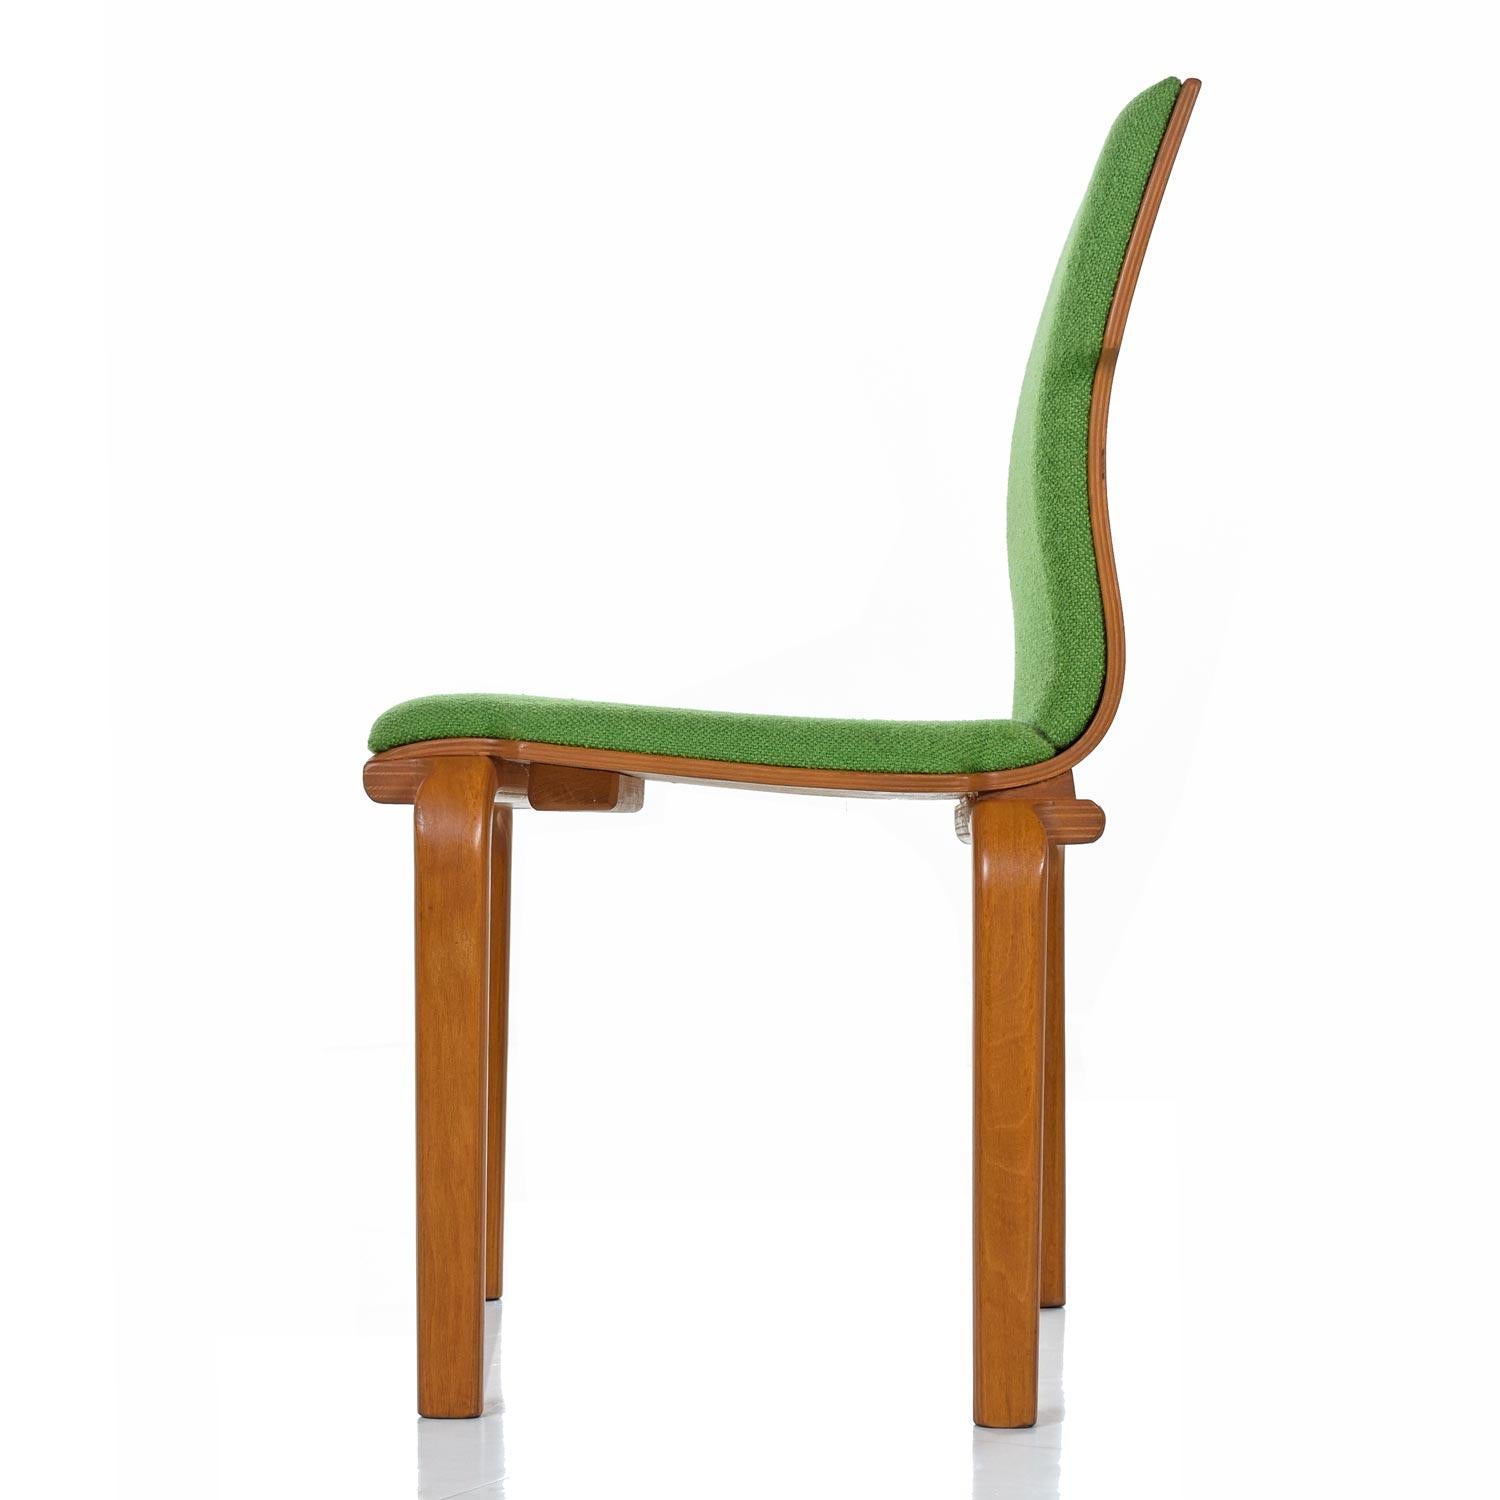 Mid-20th Century Thonet Style Mid-Century Modern Maple Bent Ply Green Wool Tweed Dining Chair Set